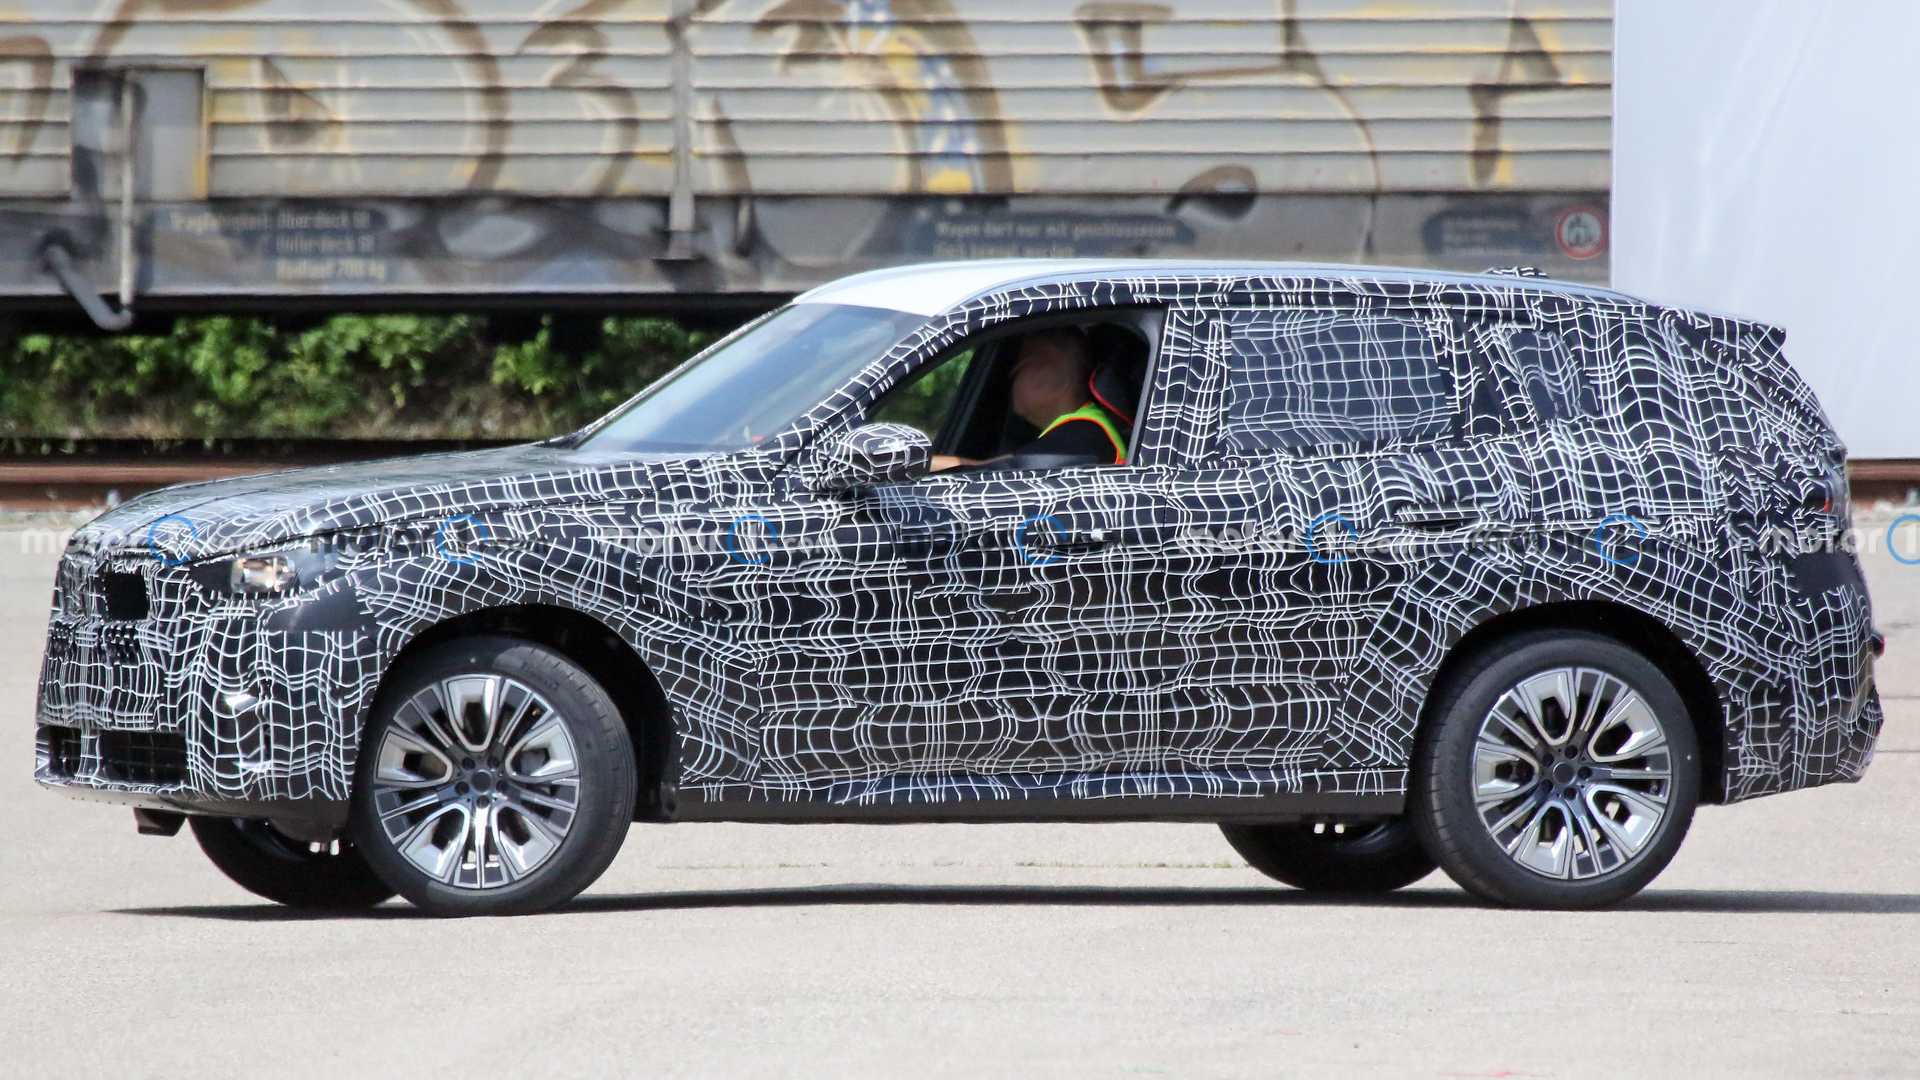 The new generation BMW X3 will be launched in 2024 with PHEV drivetrain The new generation BMW X3 made its first appearance on the test run, expected to be launched in 2024 2024-bmw-x3-side-view-spy-photo.jpg